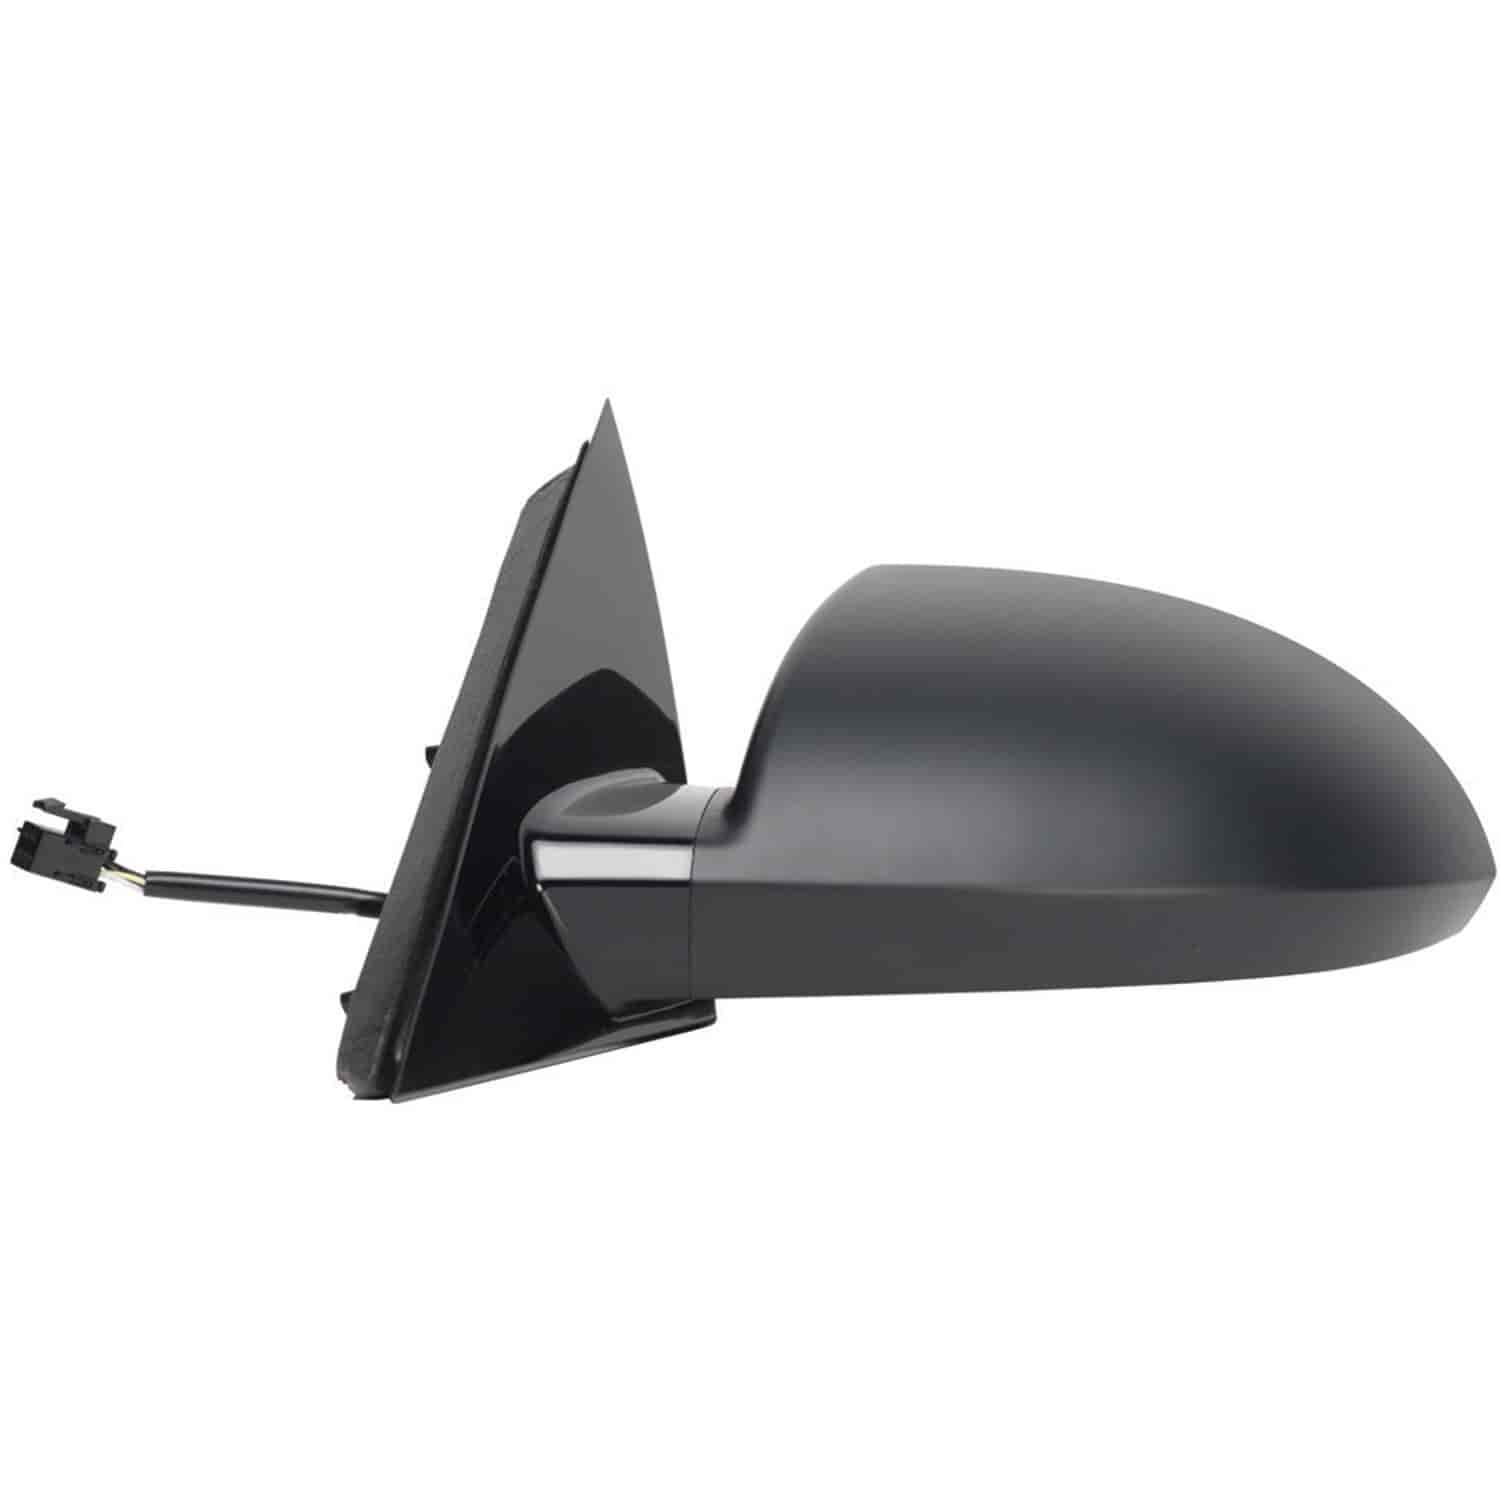 OEM Style Replacement mirror for 06-14 Chevy Impala / 2014 Impala Limited Models only driver side mi